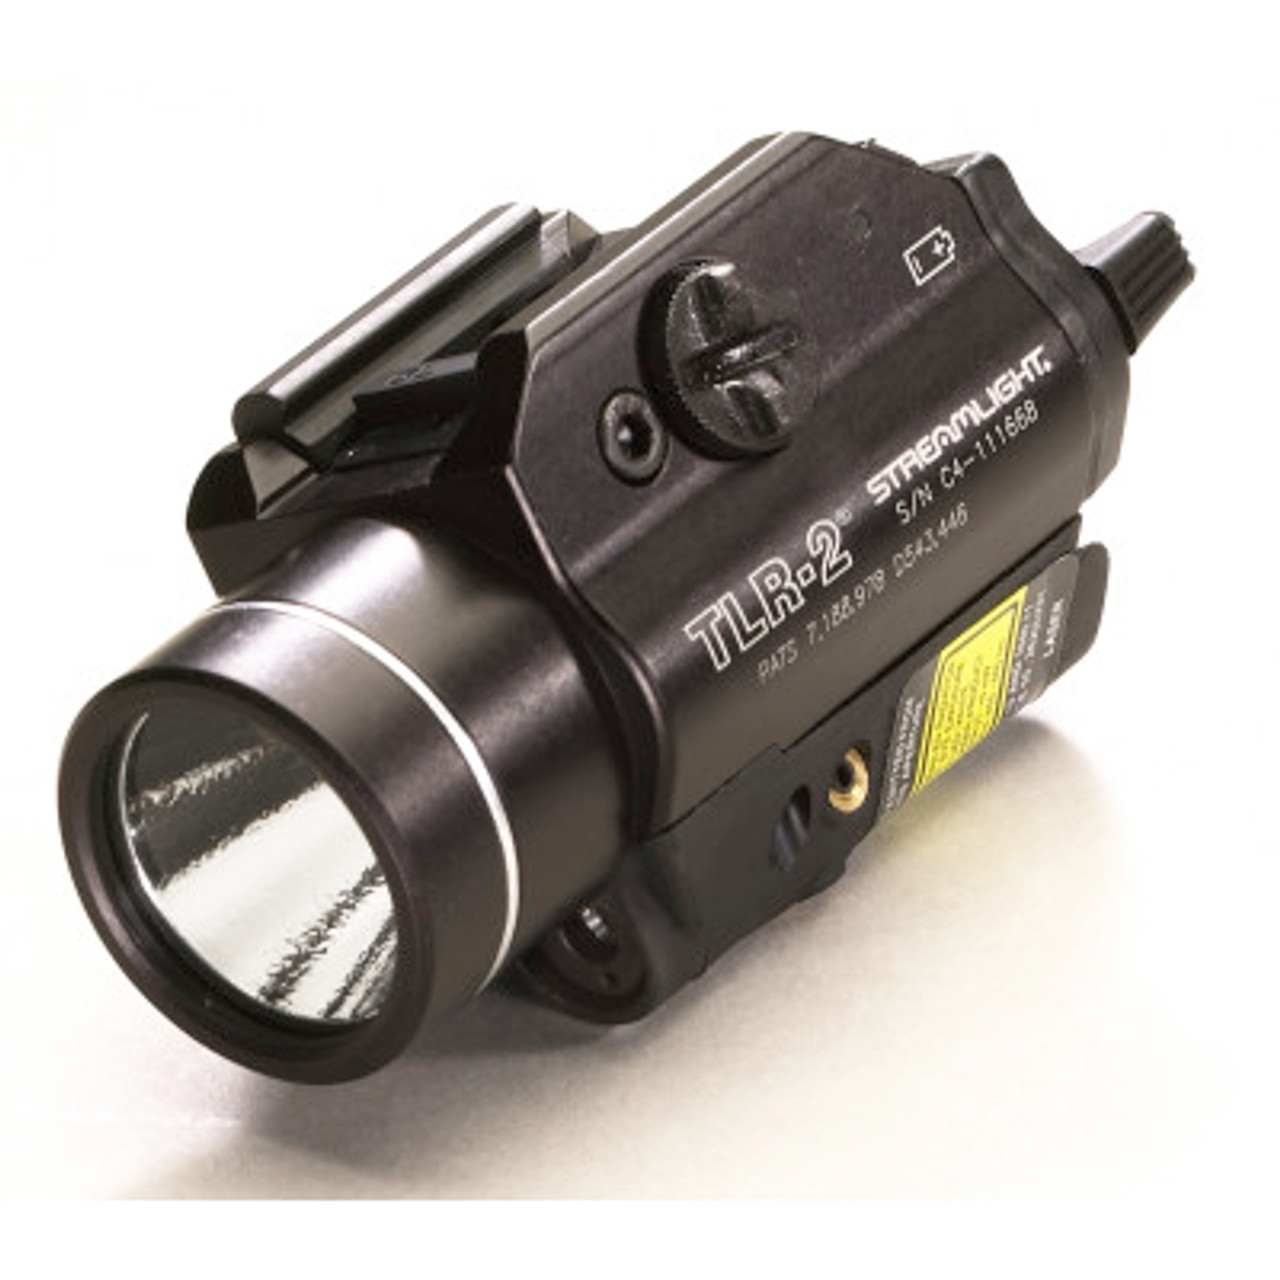 Streamlight 69120 TLR-2 - Includes Rail Locating Keys and lithium batteries. Box - Black - DSS